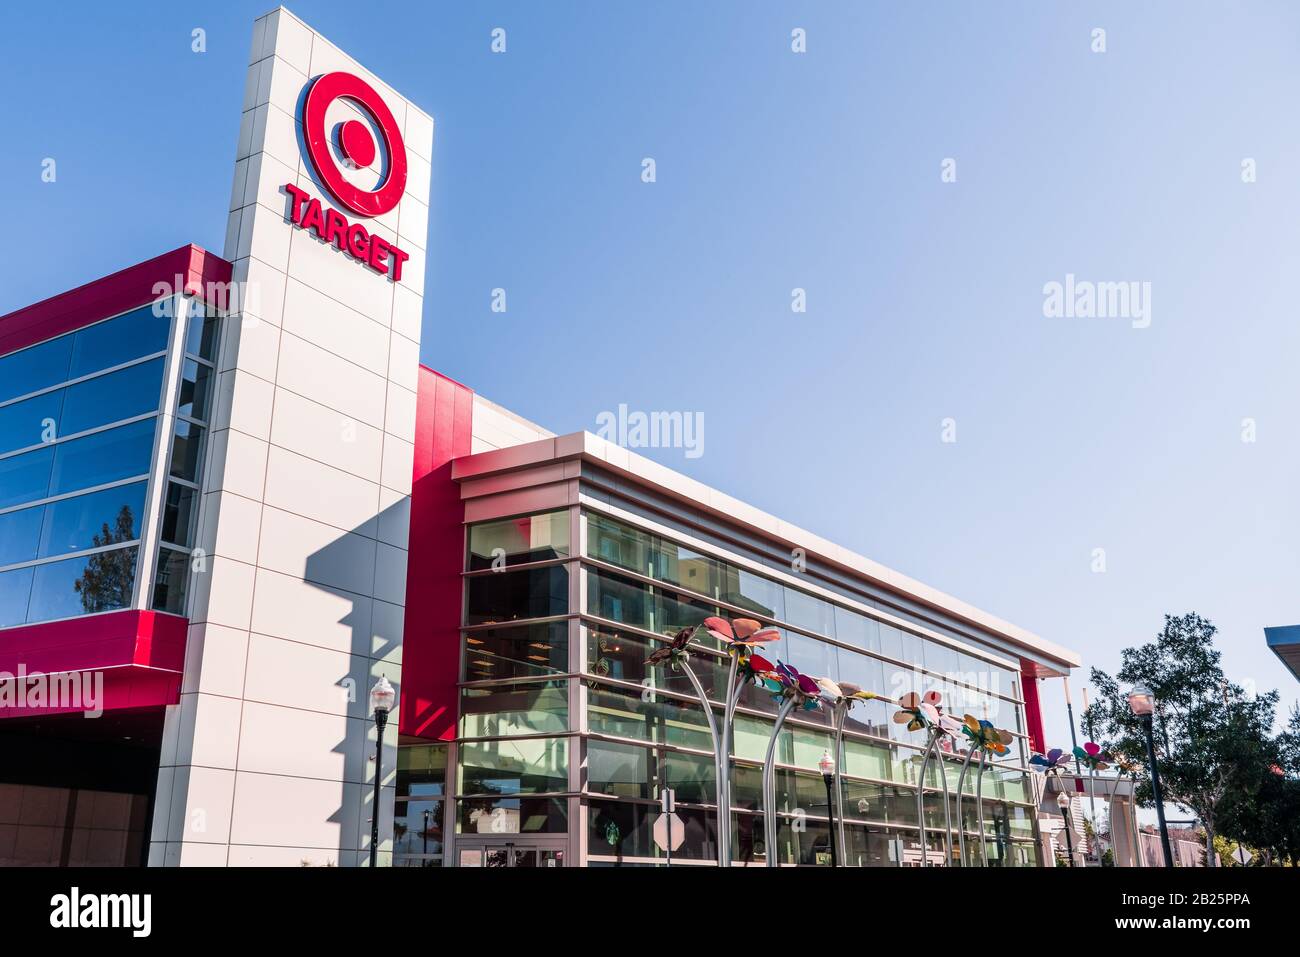 Feb 24, 2020 Sunnyvale / CA / USA - Modern Target supermarket location in San Francisco Bay Area; Target Corporation operates general merchandise disc Stock Photo